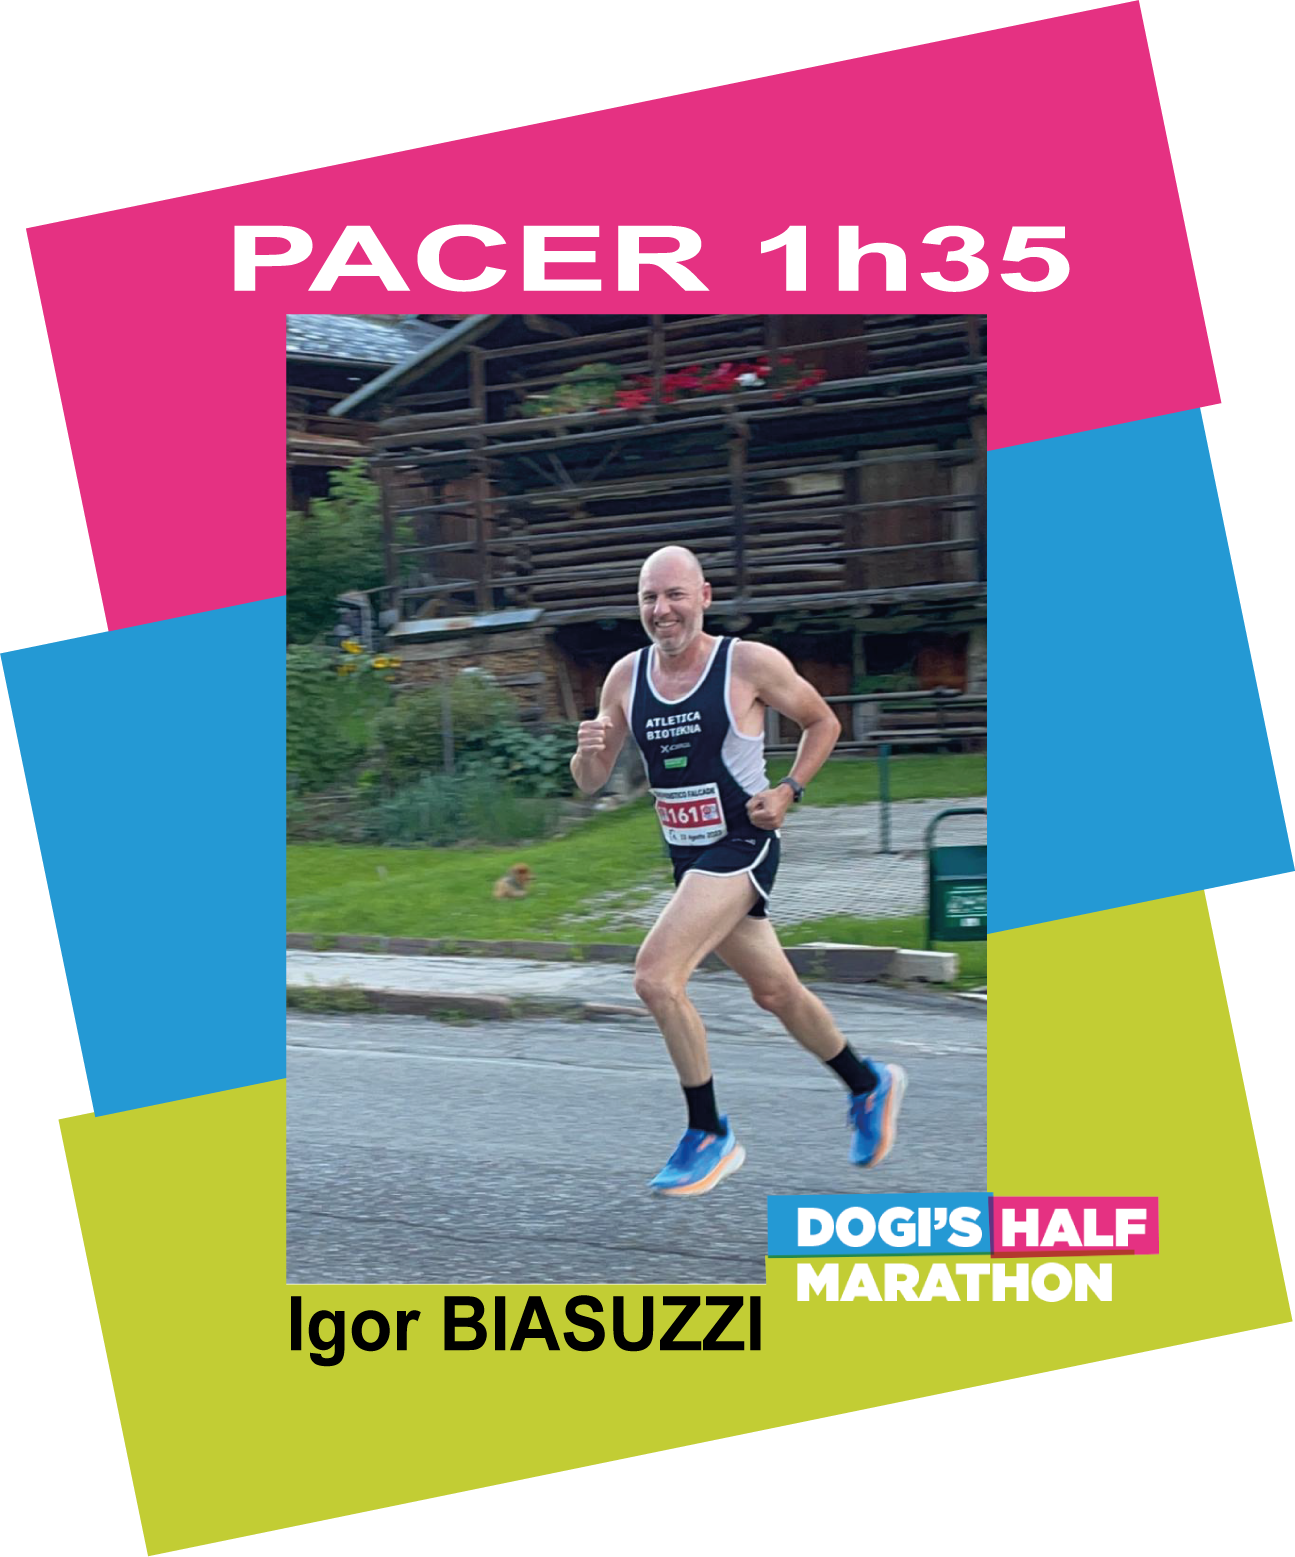 Pacer 1h35